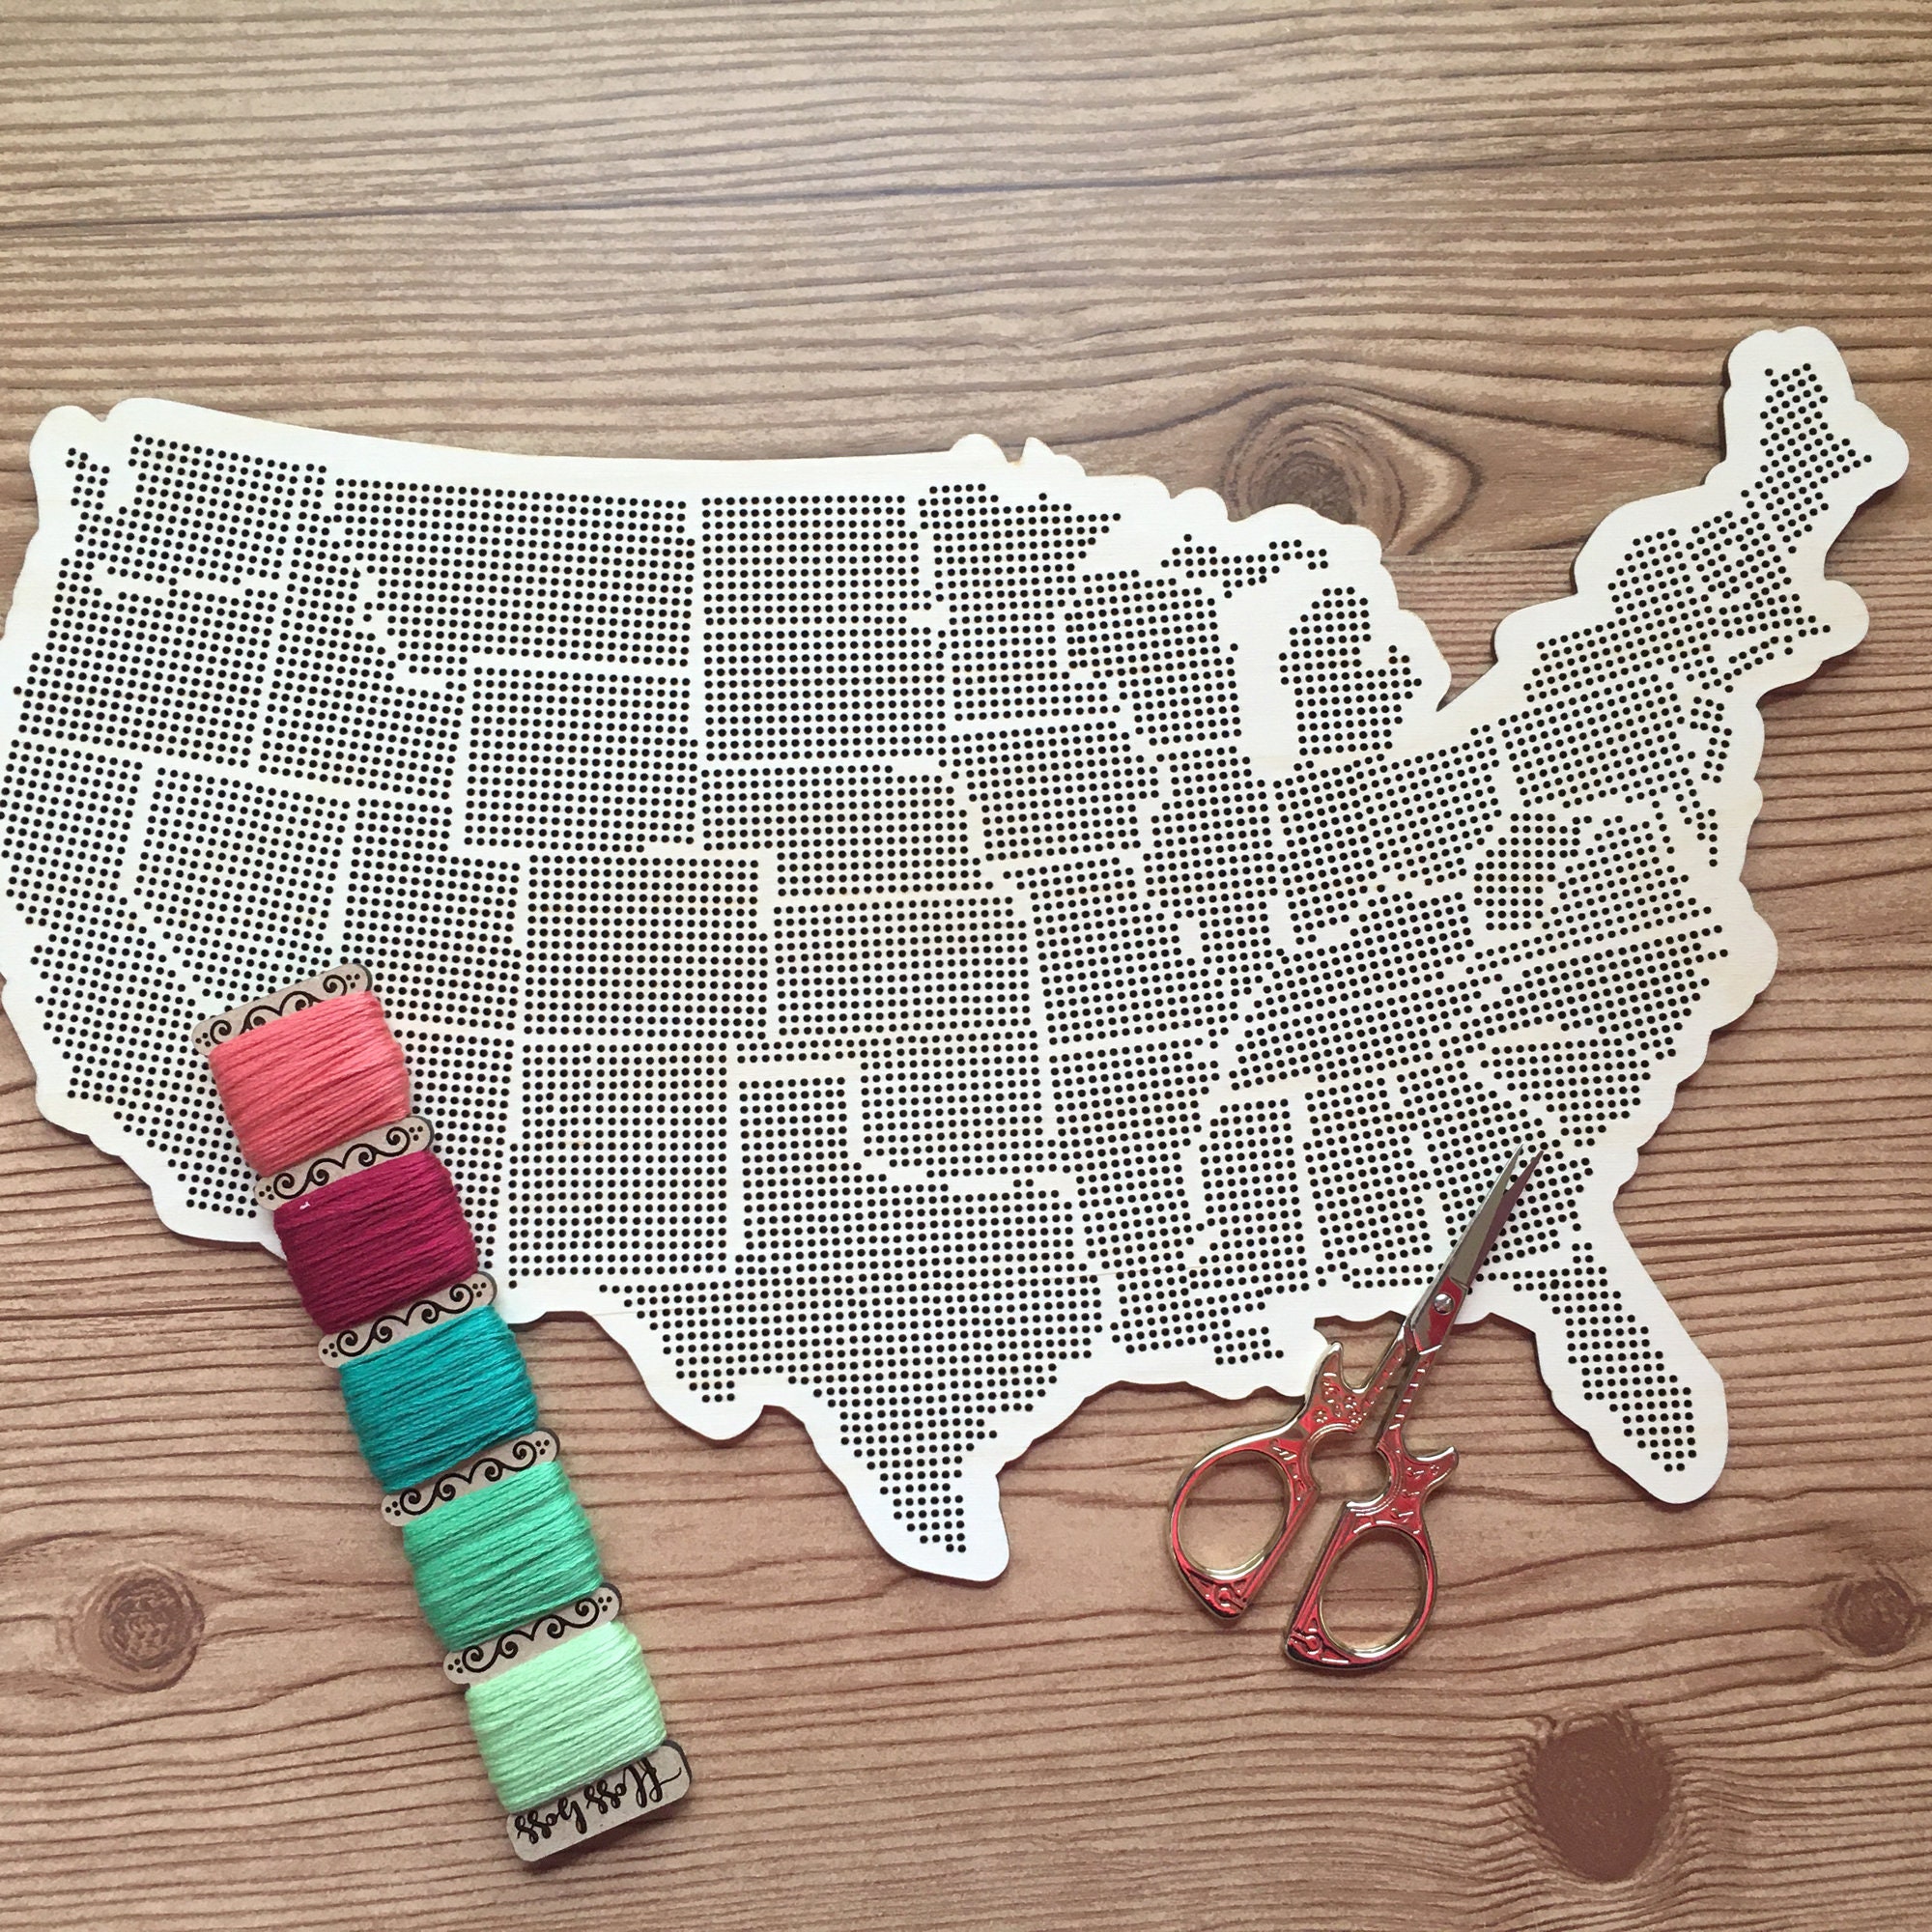 USA Map Embroidery Kit, United States Map, America Map, Embroidery Sampler  Kit, Make at Home DIY Embroidery Kit, DIY Craft Kit, rainbow map — I Heart Stitch  Art: Beginner Embroidery Kits + Patterns